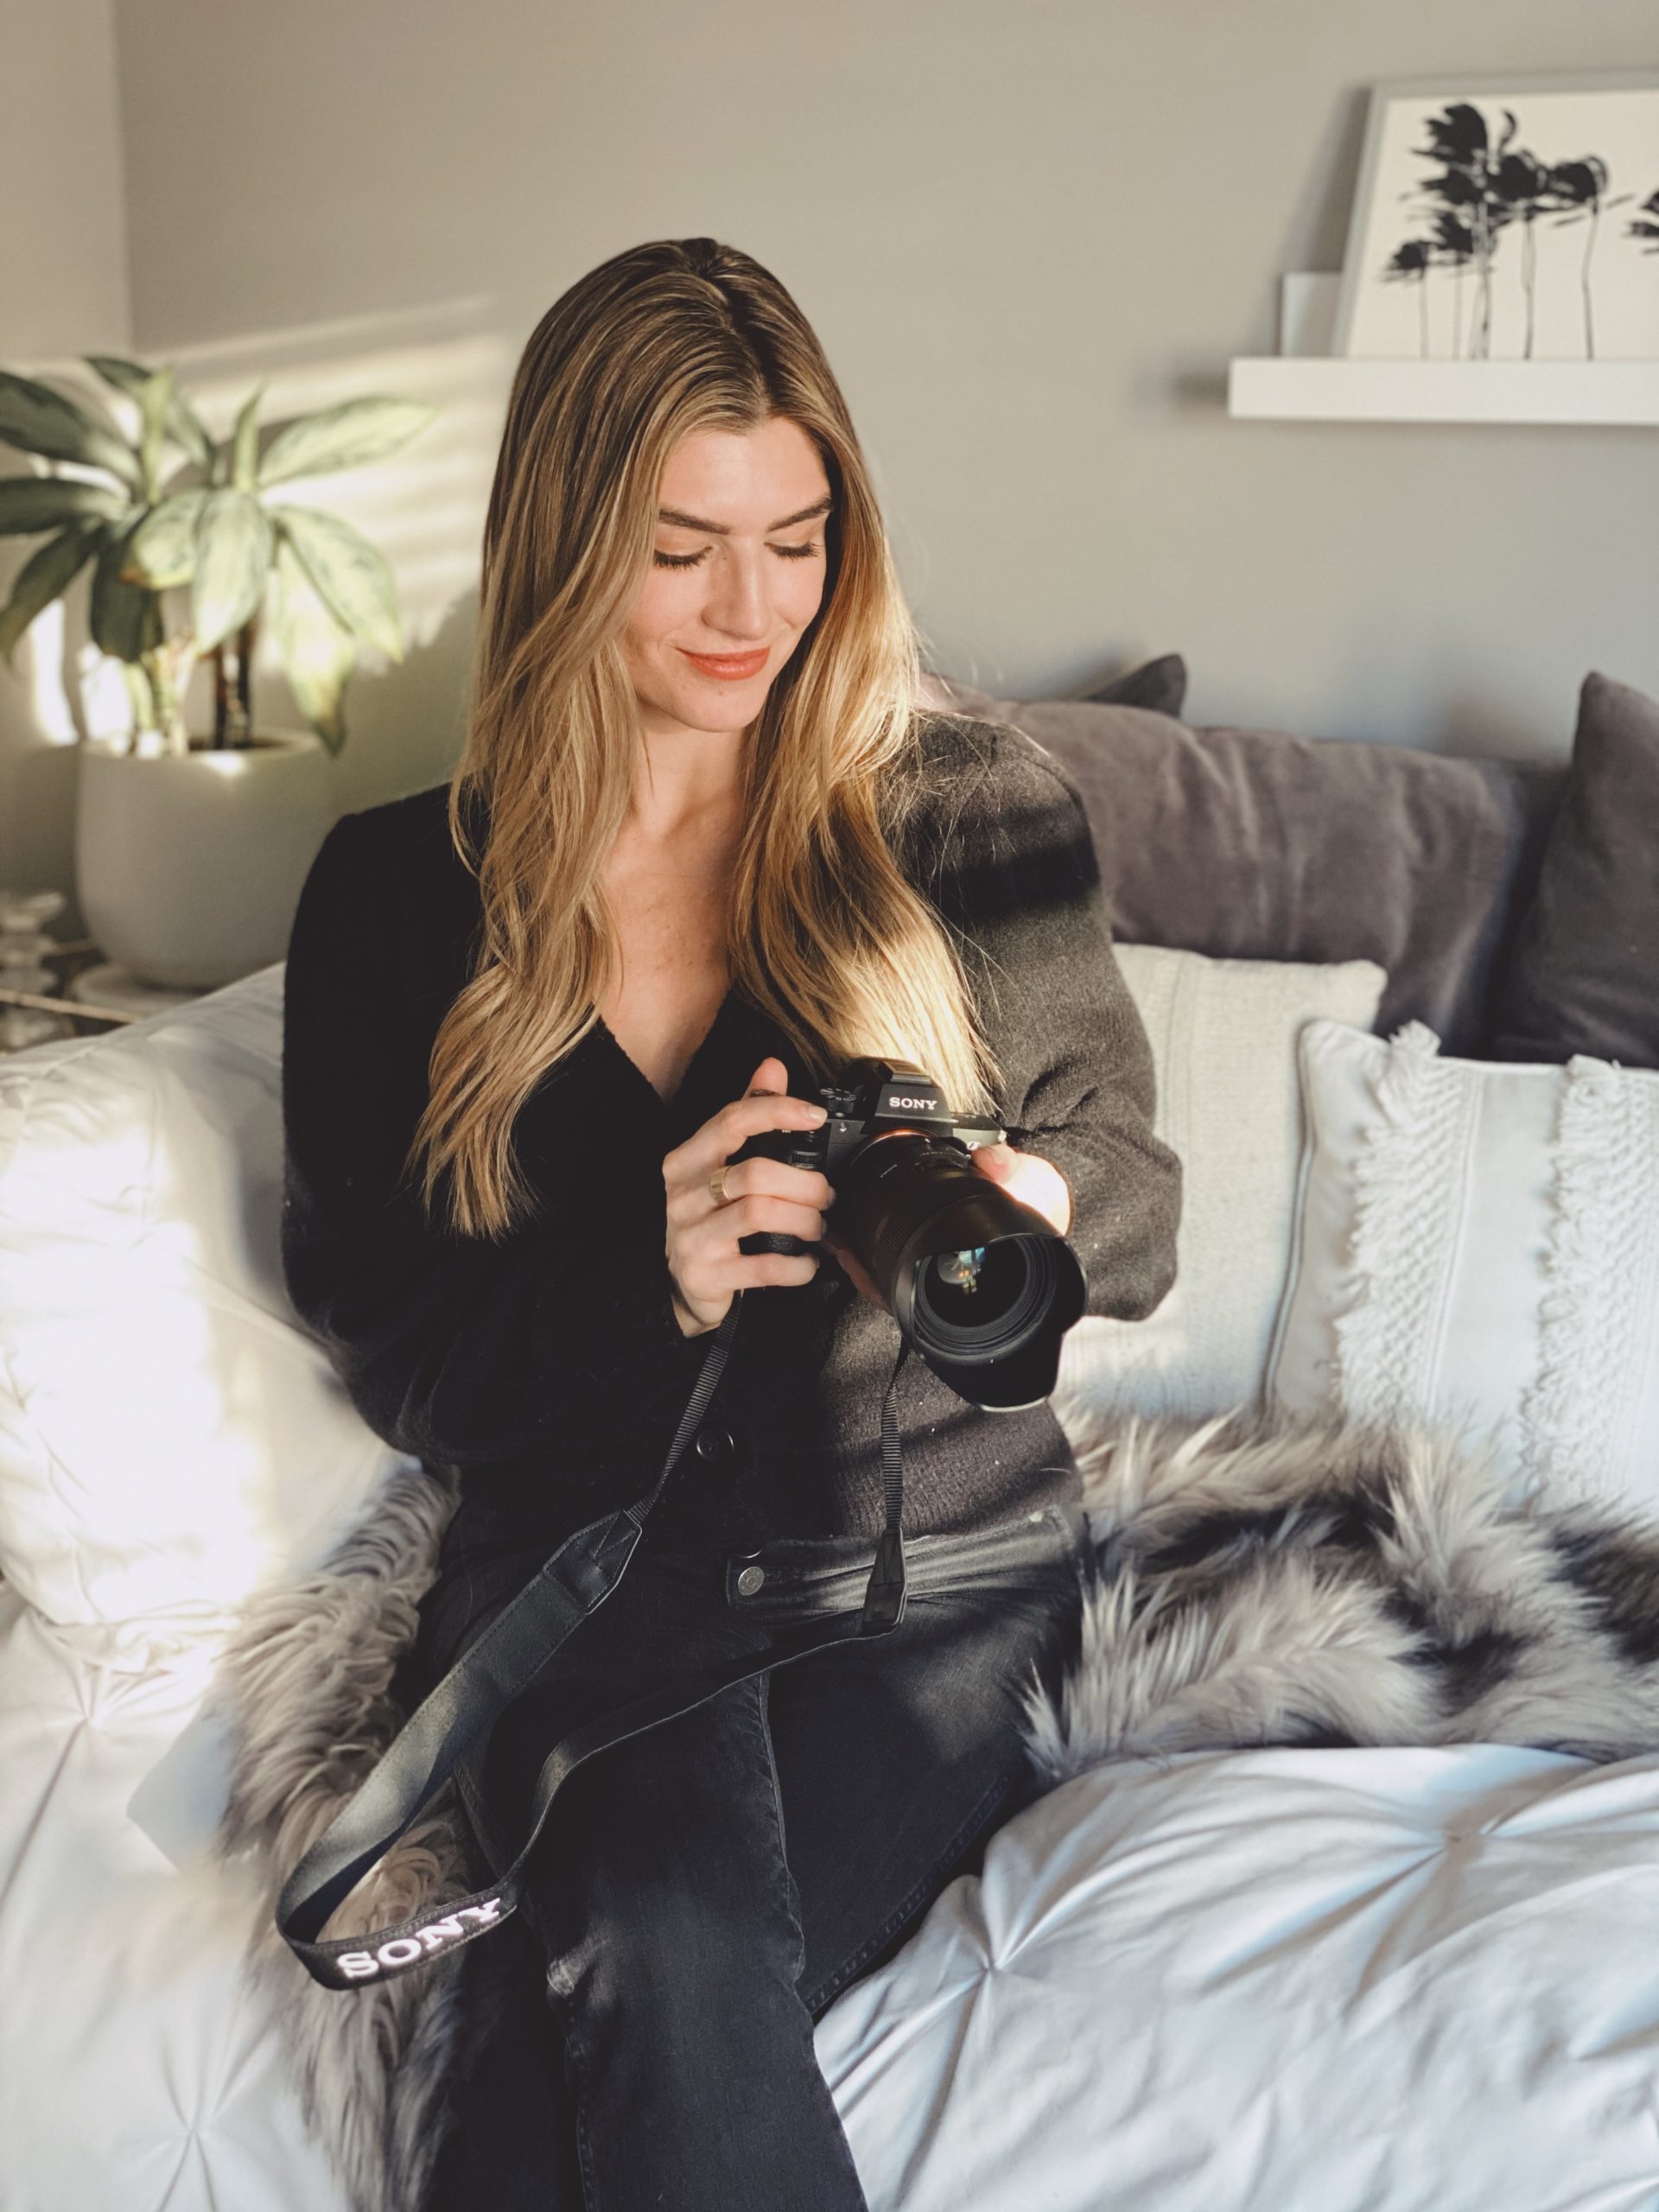 The Grey Edit - Cortney Bigelow Seattle Blogger and Lifestyle Photographer